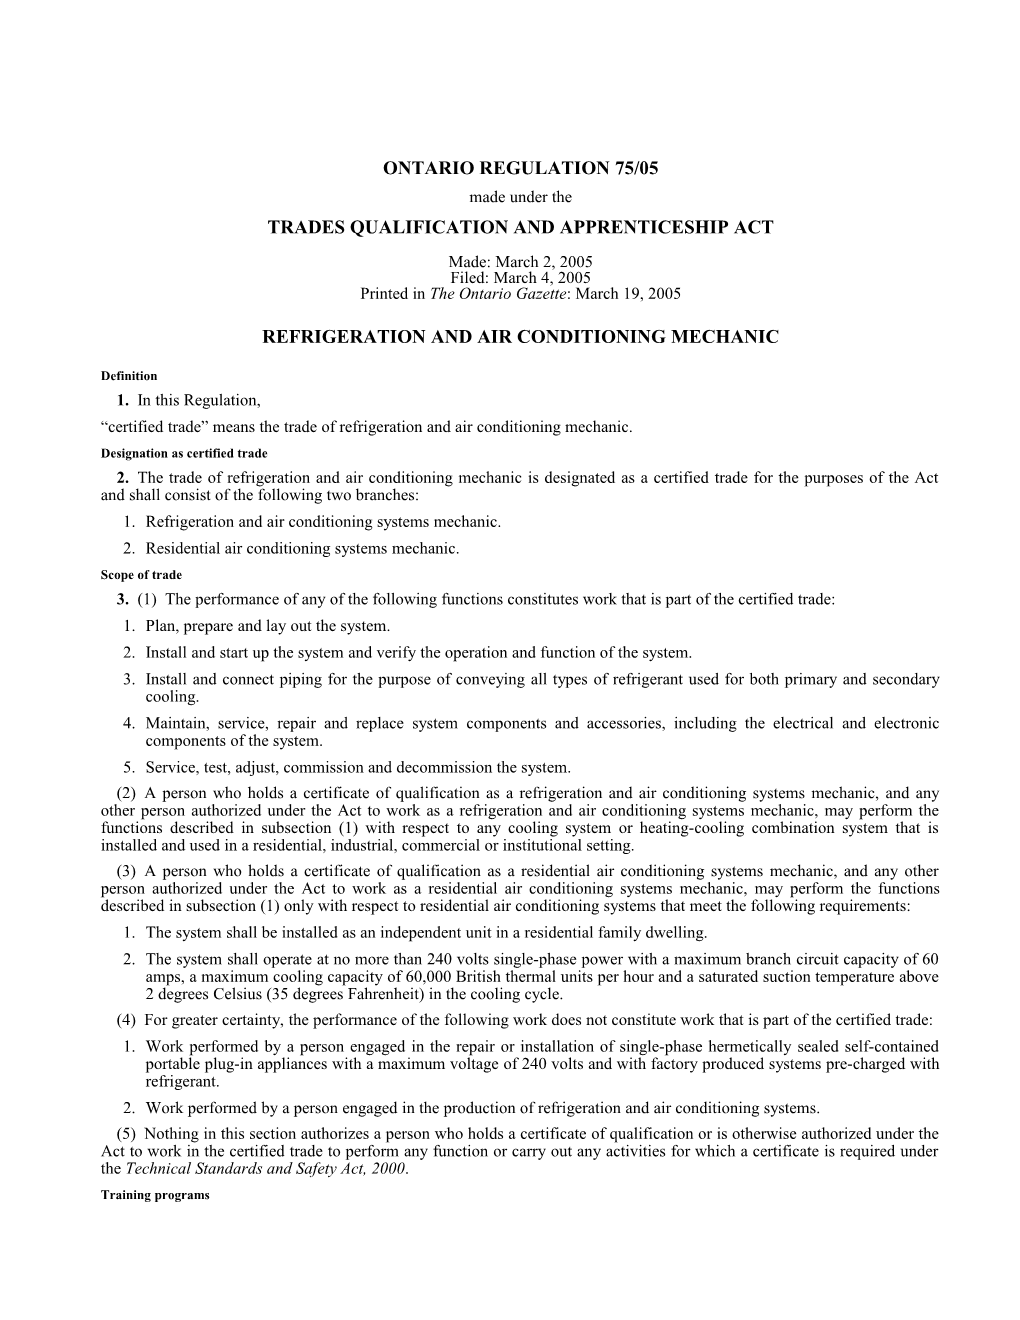 TRADES QUALIFICATION and APPRENTICESHIP ACT - O. Reg. 75/05